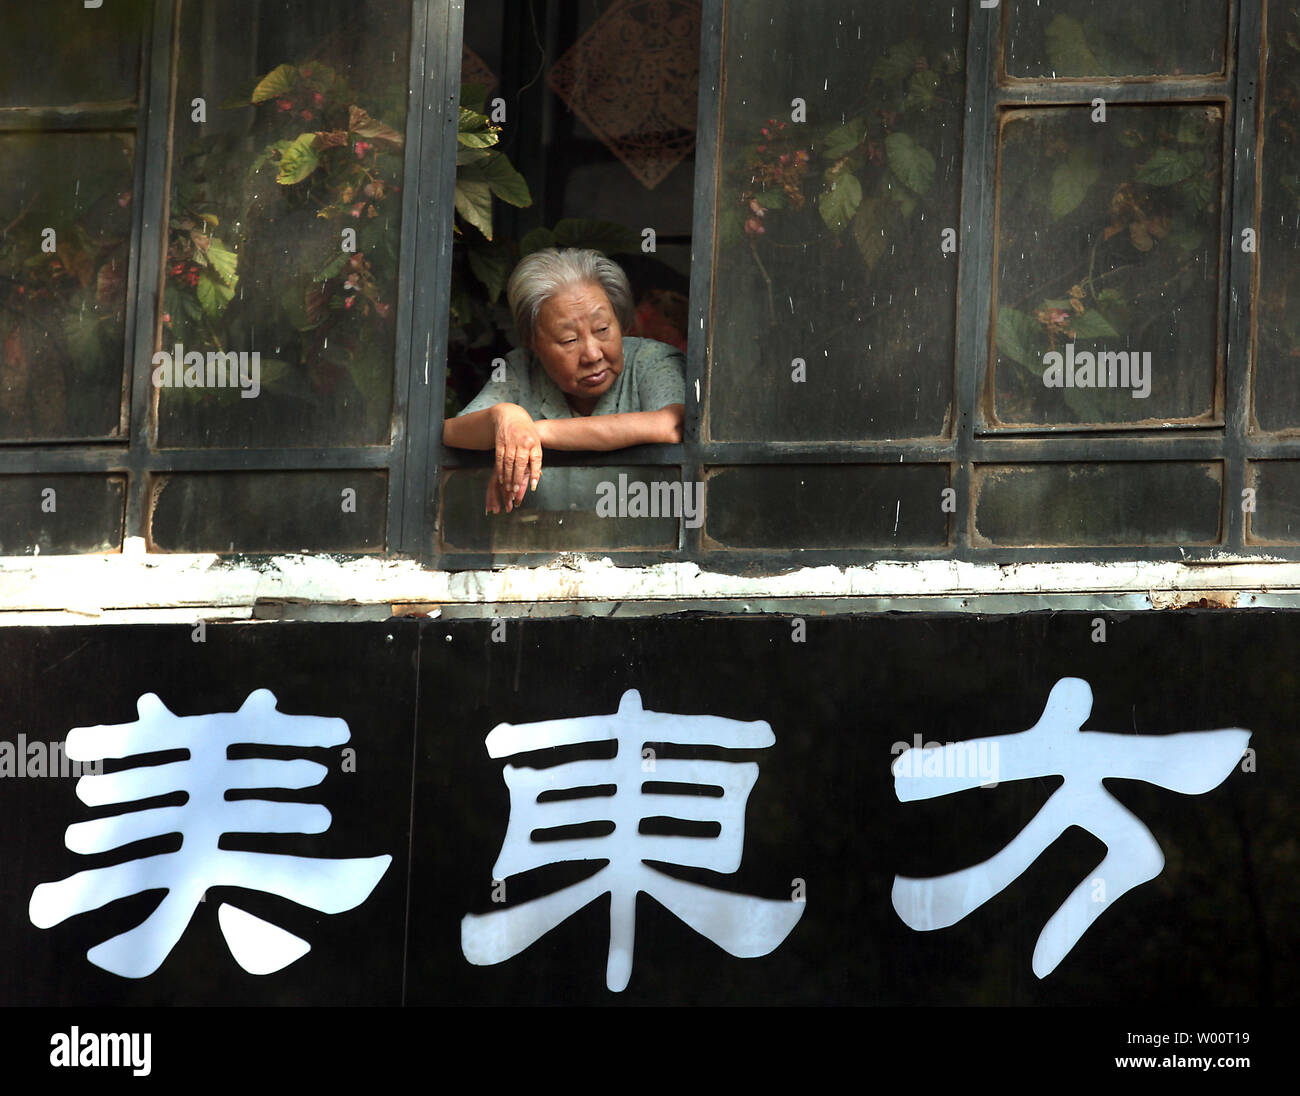 An elderly Chinese woman looks out her window above a trendy clothing store for young women in Beijing, September 11, 2010.  The proportion of people above 65 in China will surpass that of Japan in 2030, which will make China the world's most aged society, according to the Chinese Academy of Social Sciences.  The problem with an increase in China's elderly population is that it will slow GDP per capita growth, investment and capital accumulation, while at the same time increasing public debt.      UPI/Stephen Shaver Stock Photo